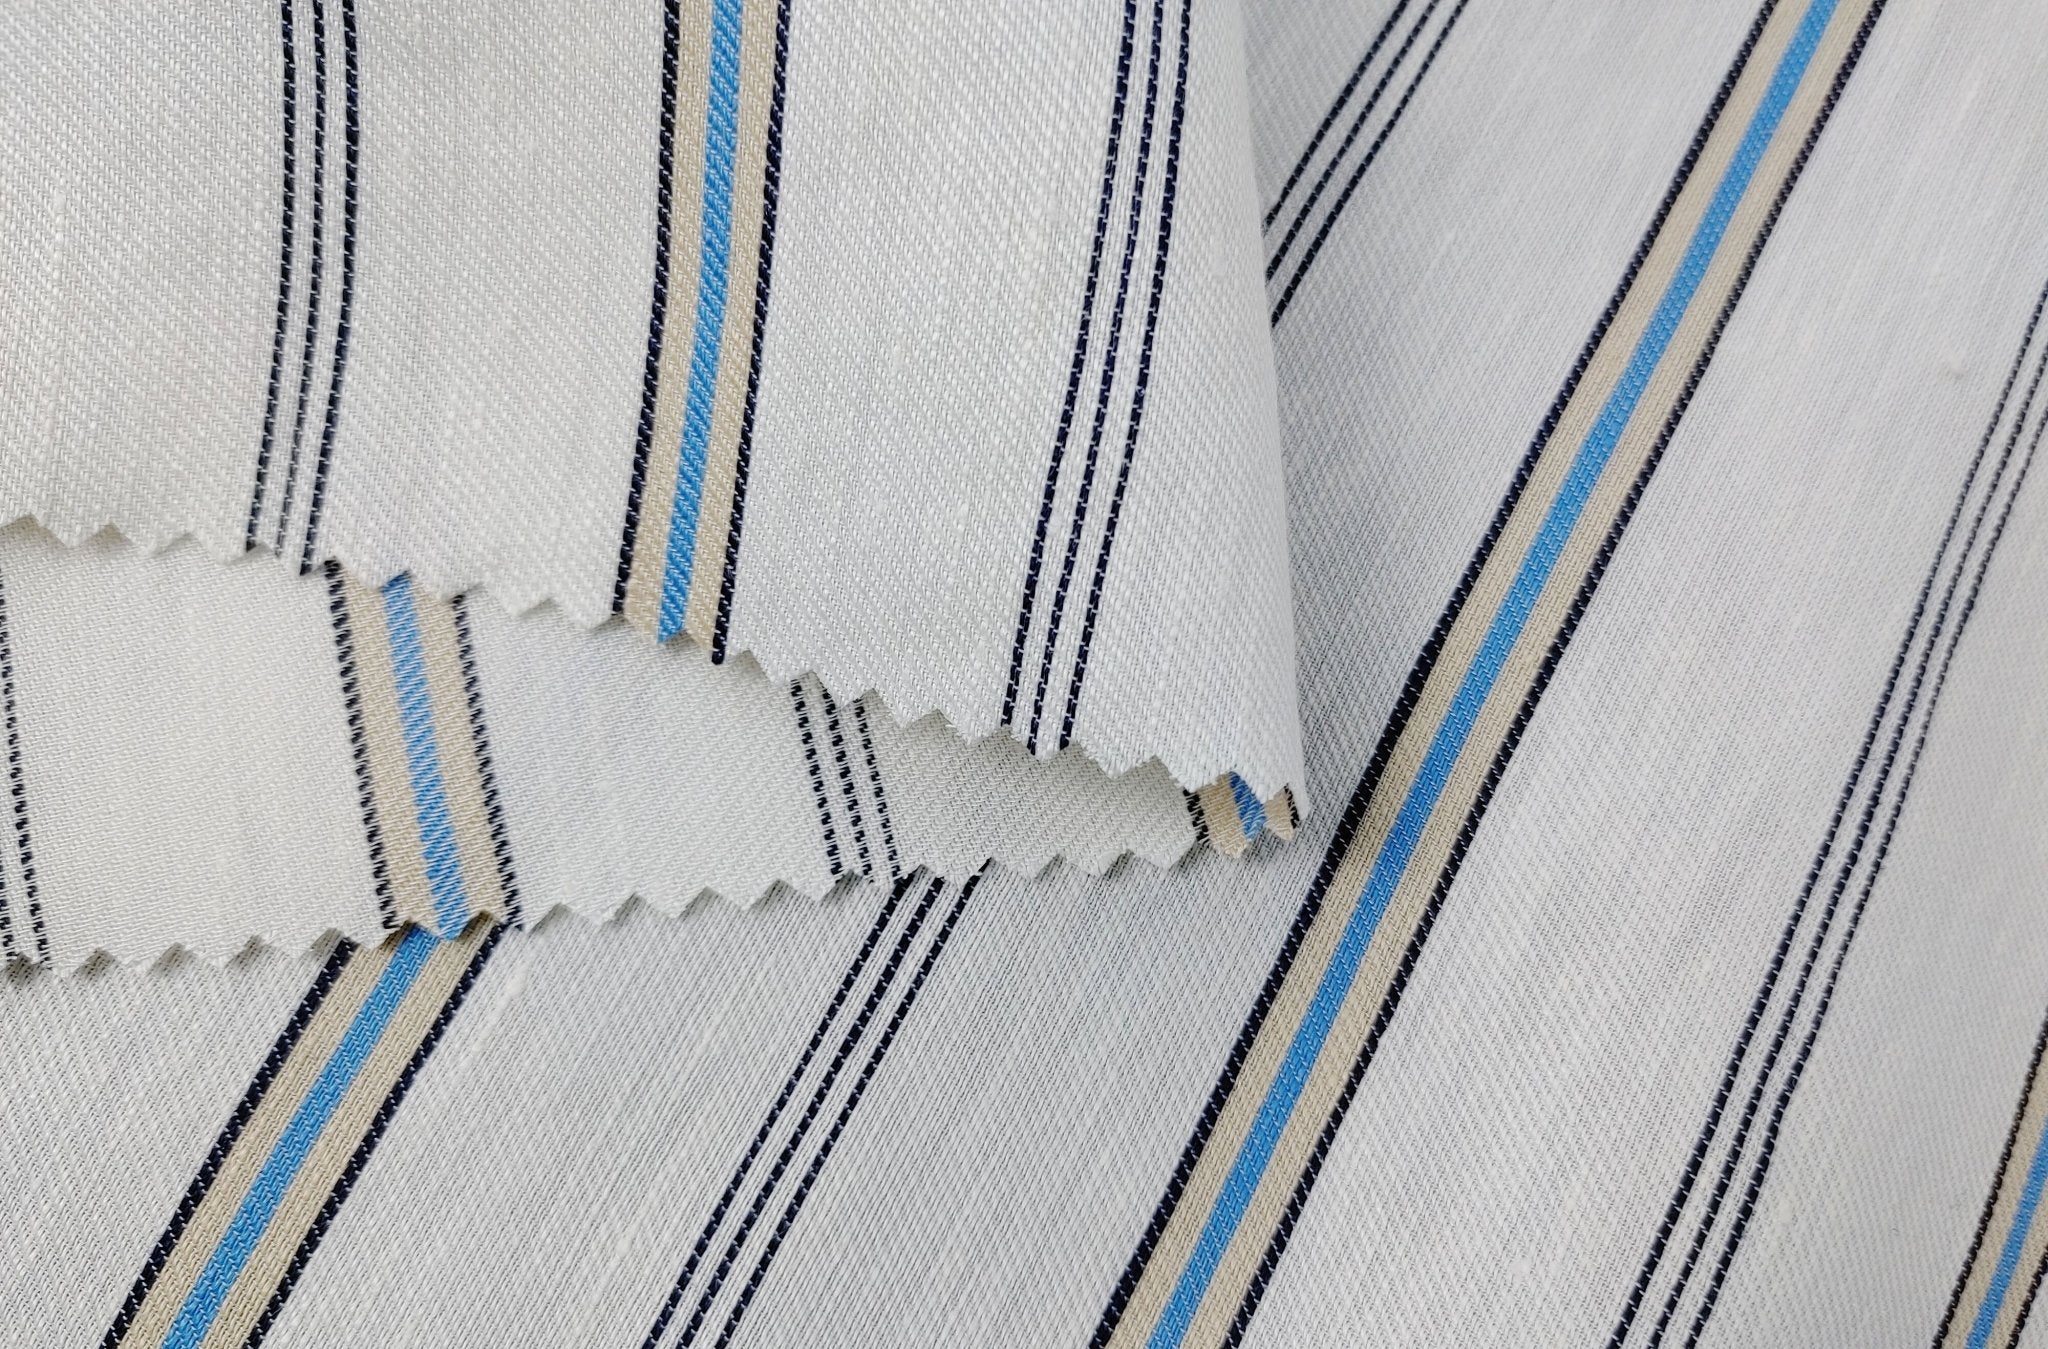 Linen Rayon Twill Fabric with Stripe Pattern, Subtle Glossy Effect 6809 6810 7154 - The Linen Lab - Ivory